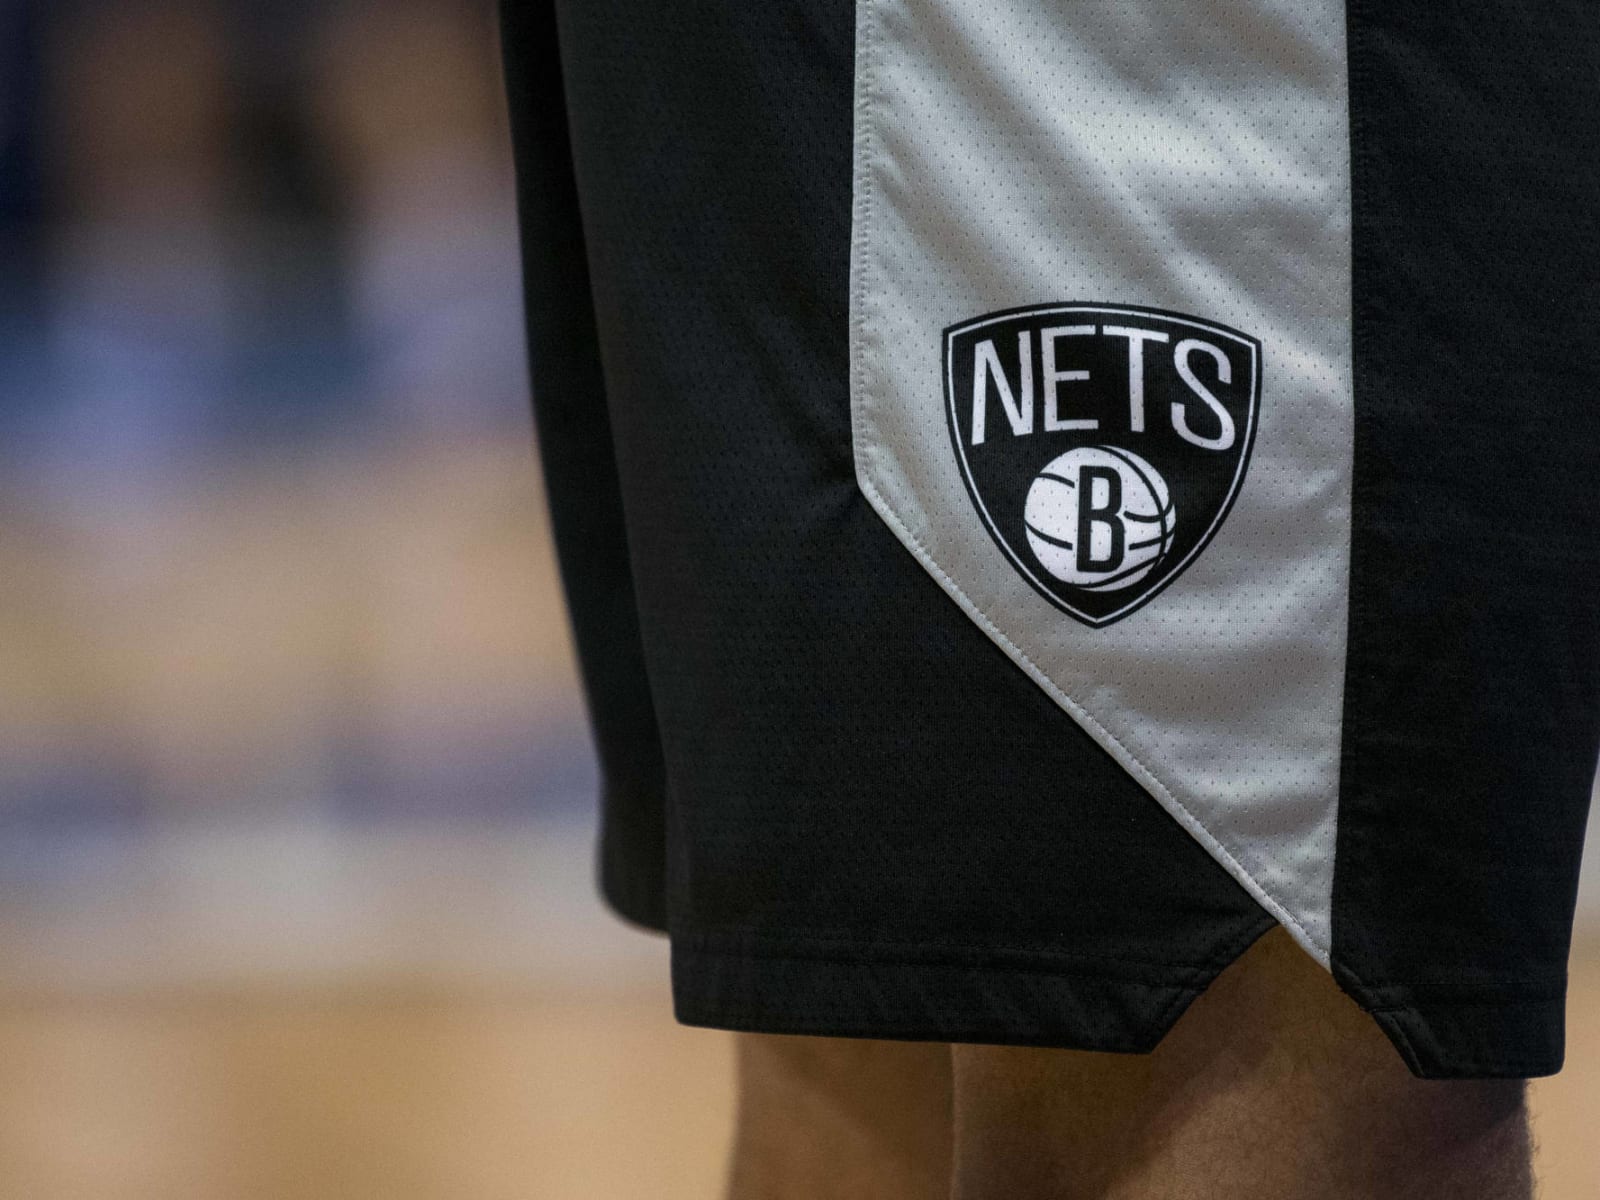 Nets' daring City Edition uniform drop has fans completely torn